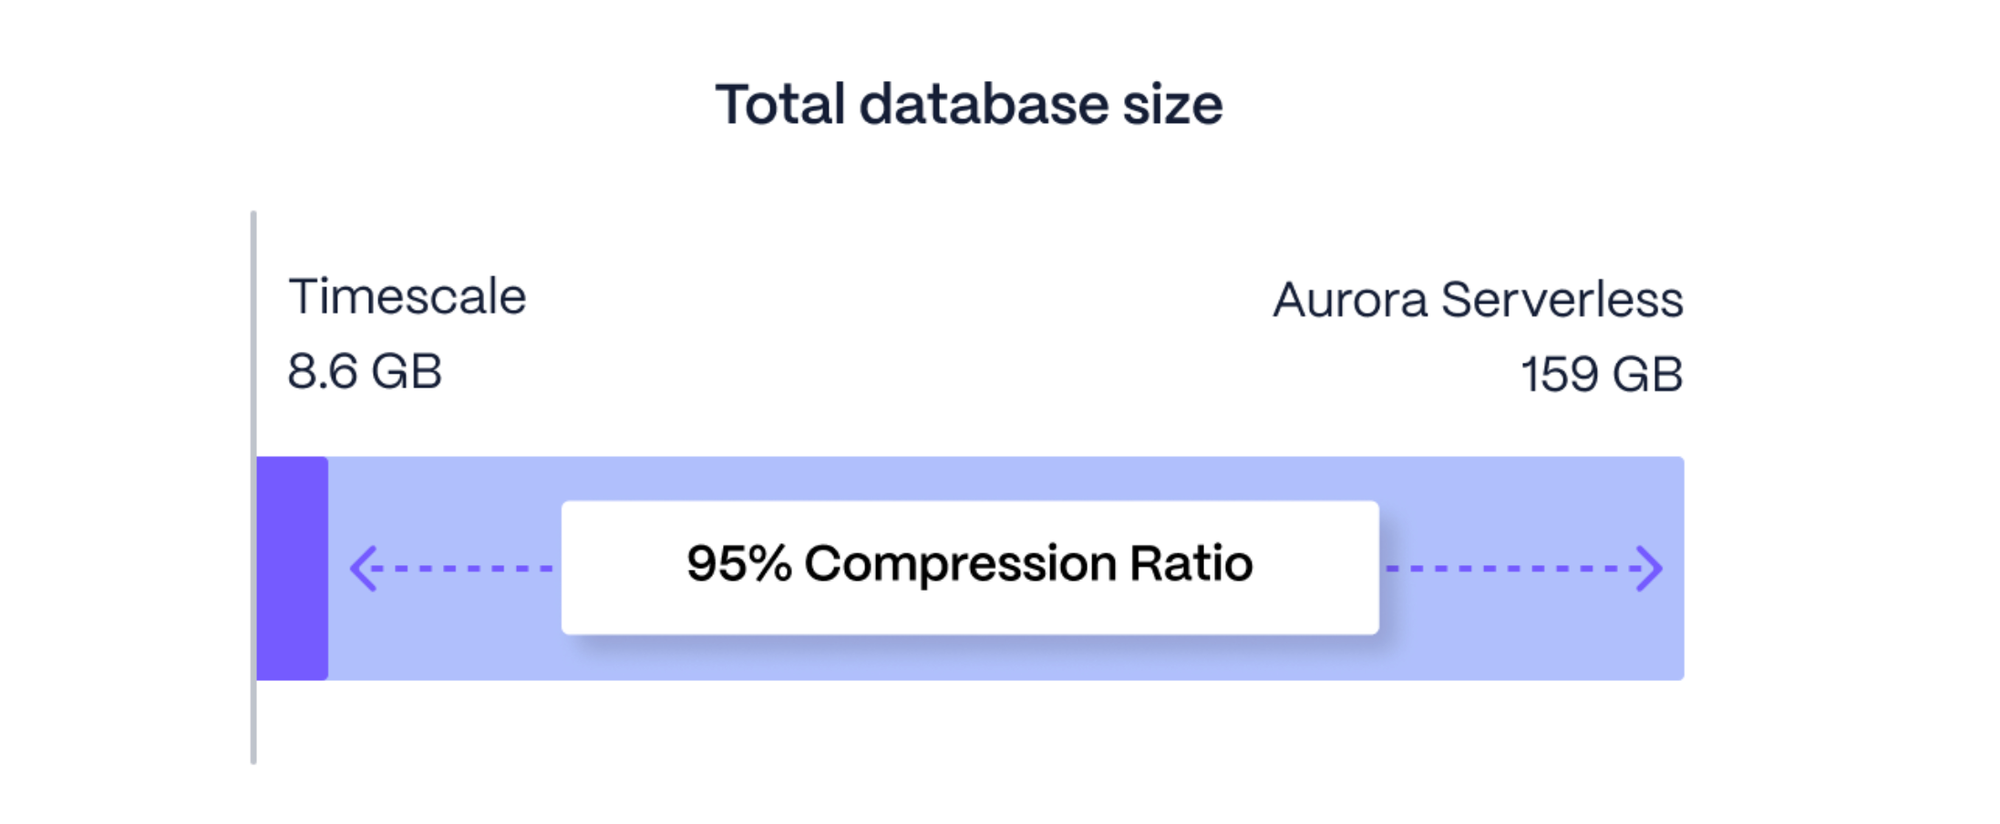 Total database size